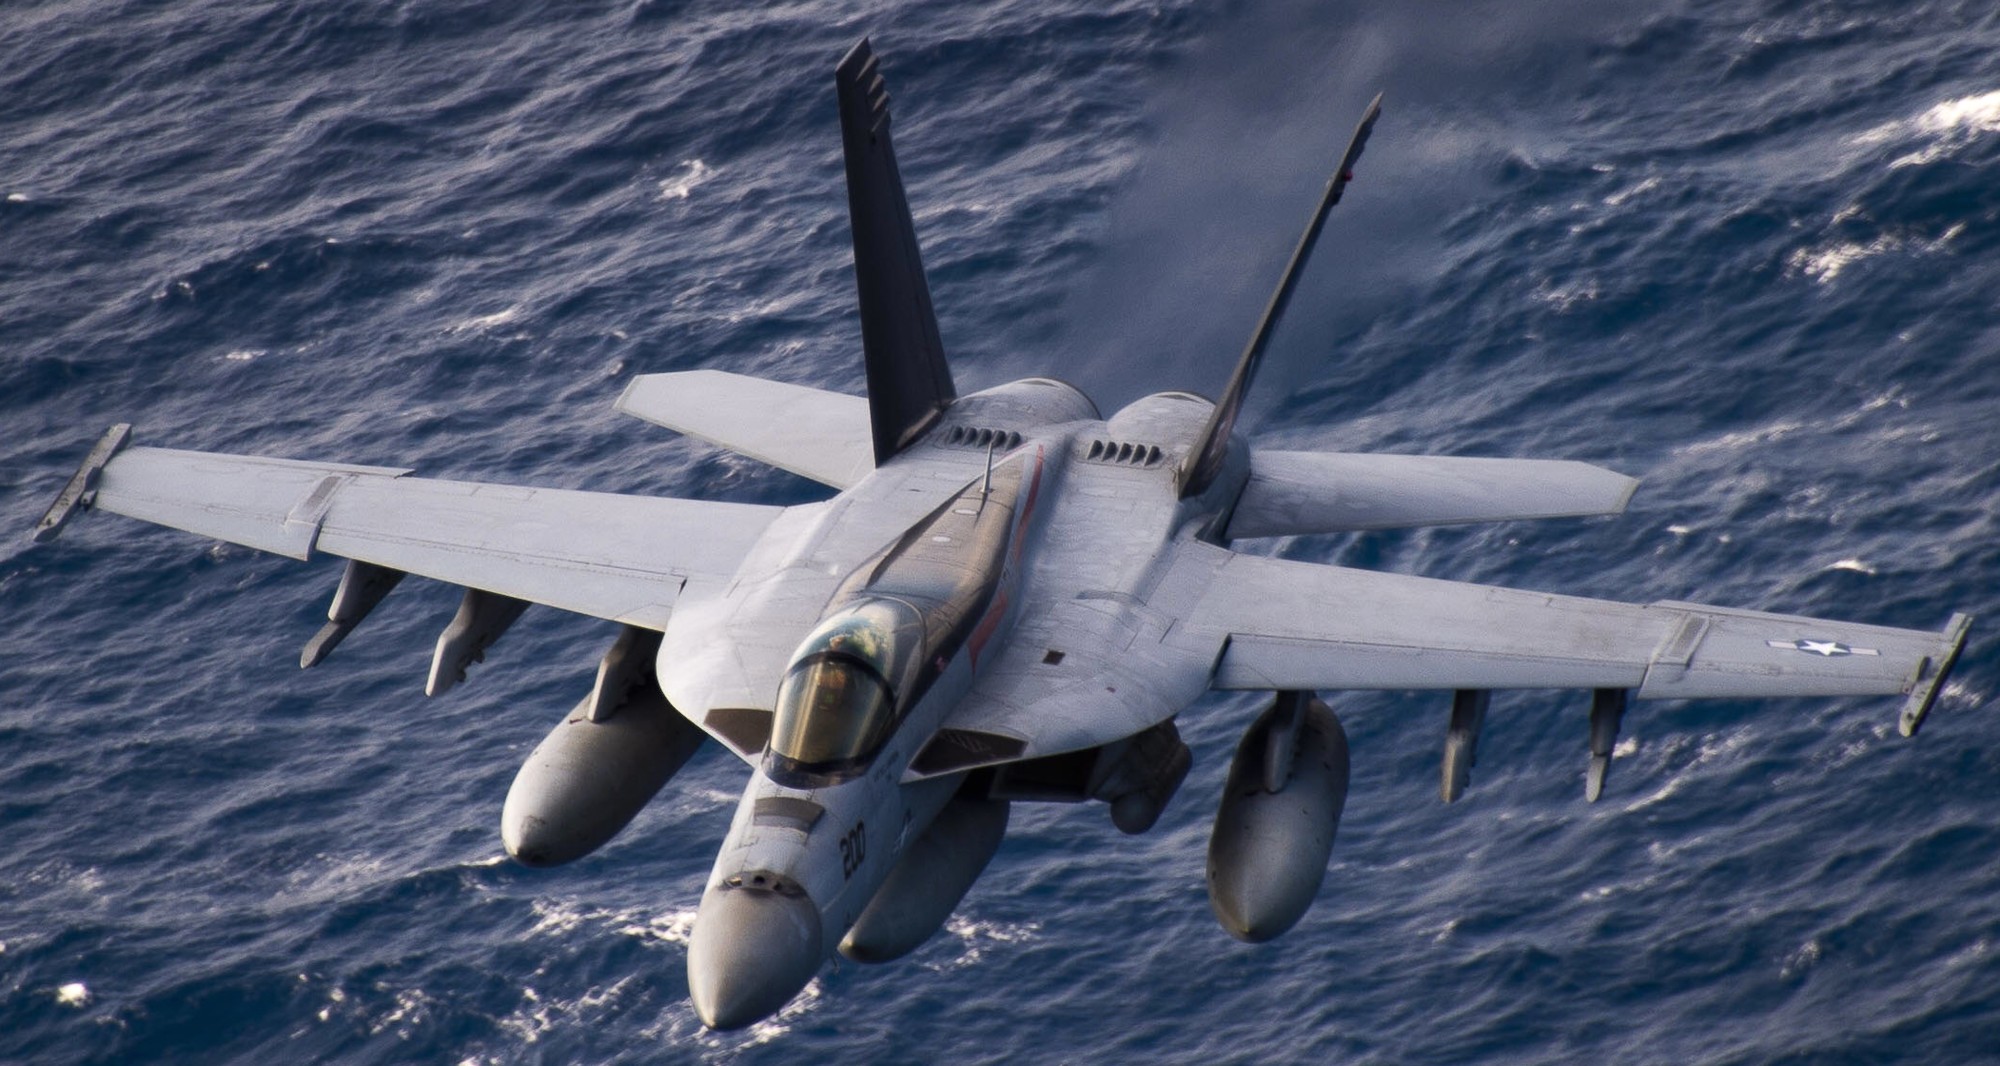 vfa-14 tophatters strike fighter squadron f/a-18e super hornet cvn-72 uss abraham lincoln cvw-9 us navy 52